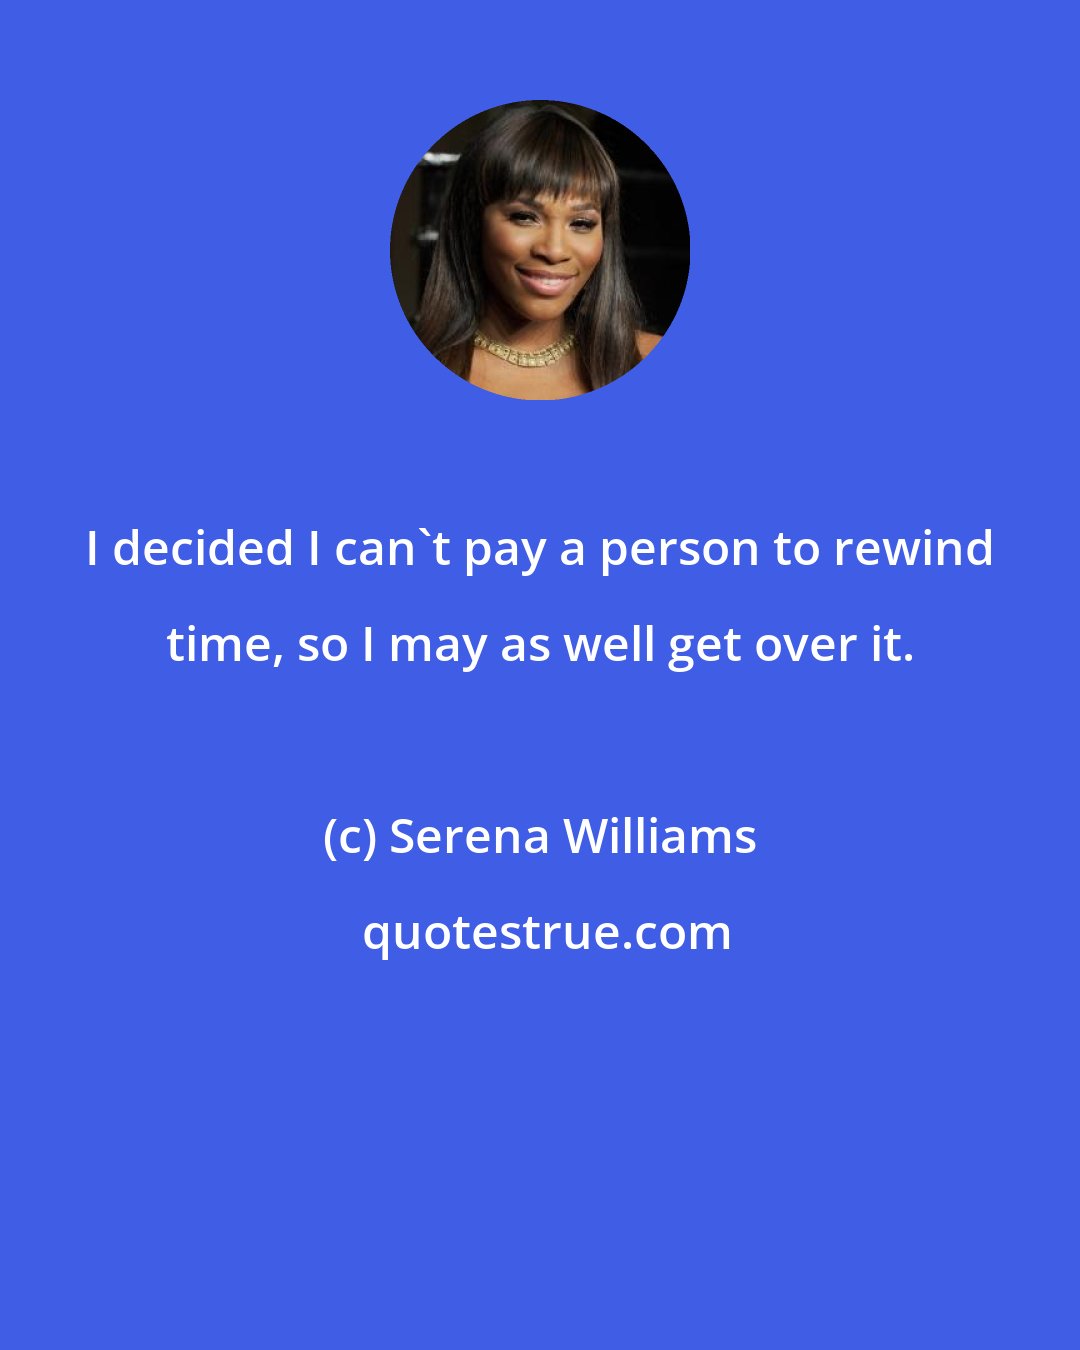 Serena Williams: I decided I can't pay a person to rewind time, so I may as well get over it.